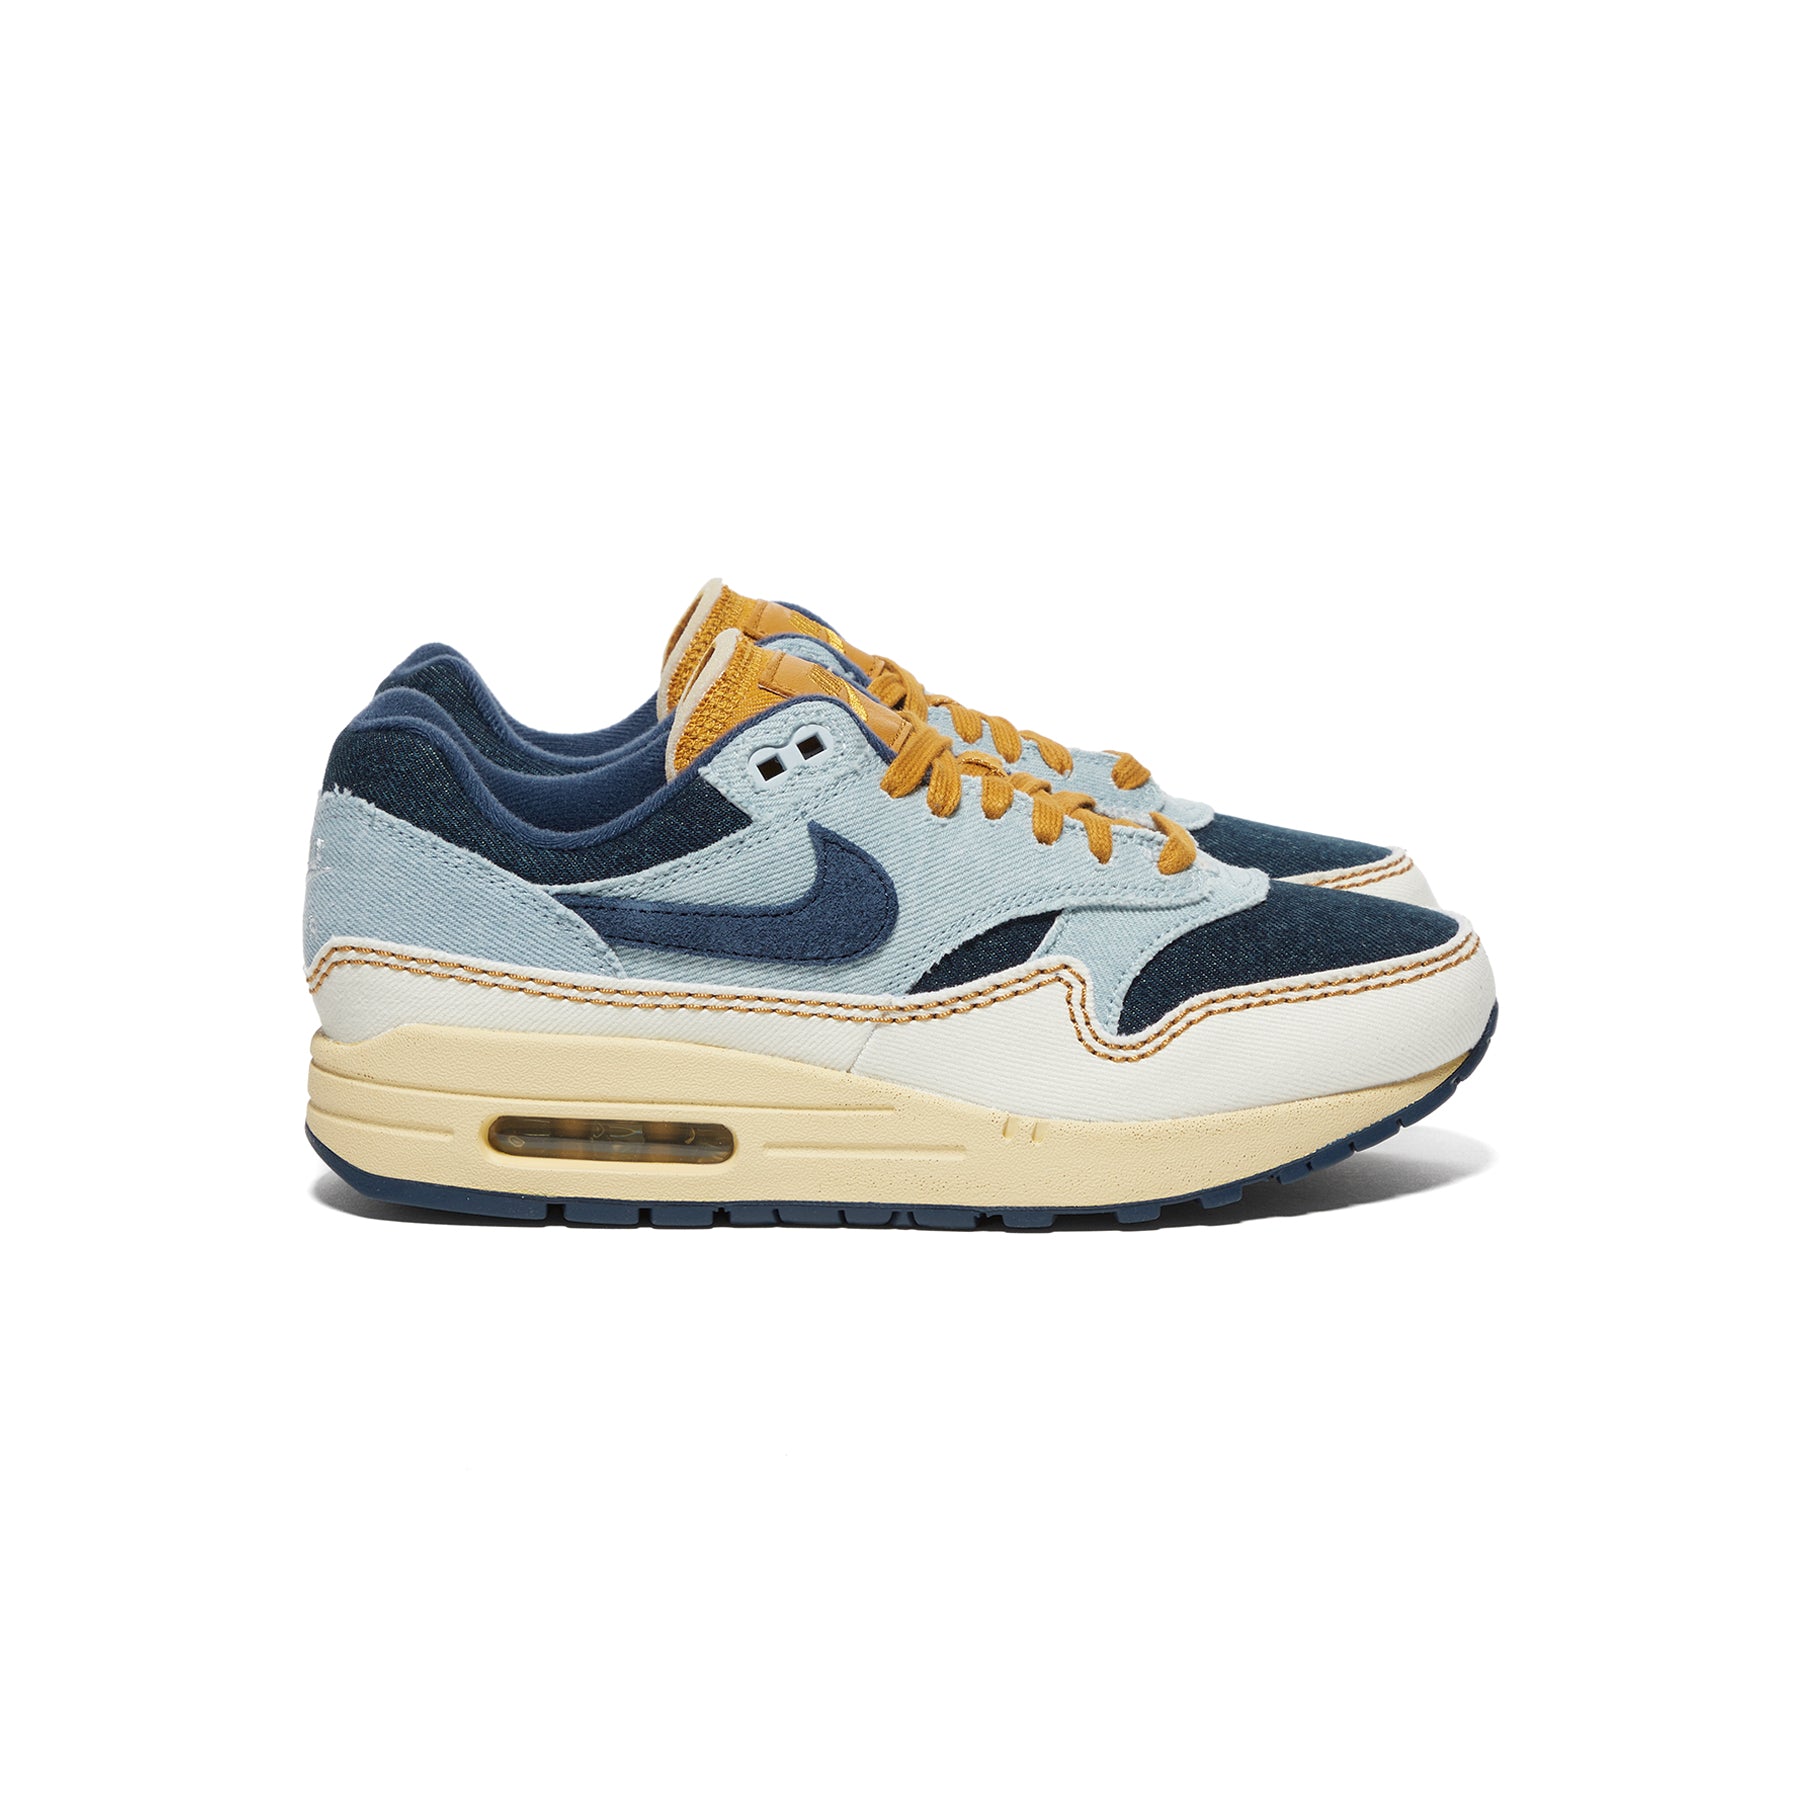 1 Navy/Pale Air \'87 Ivory) Max Concepts Nike Womens (Aura/Midnight –